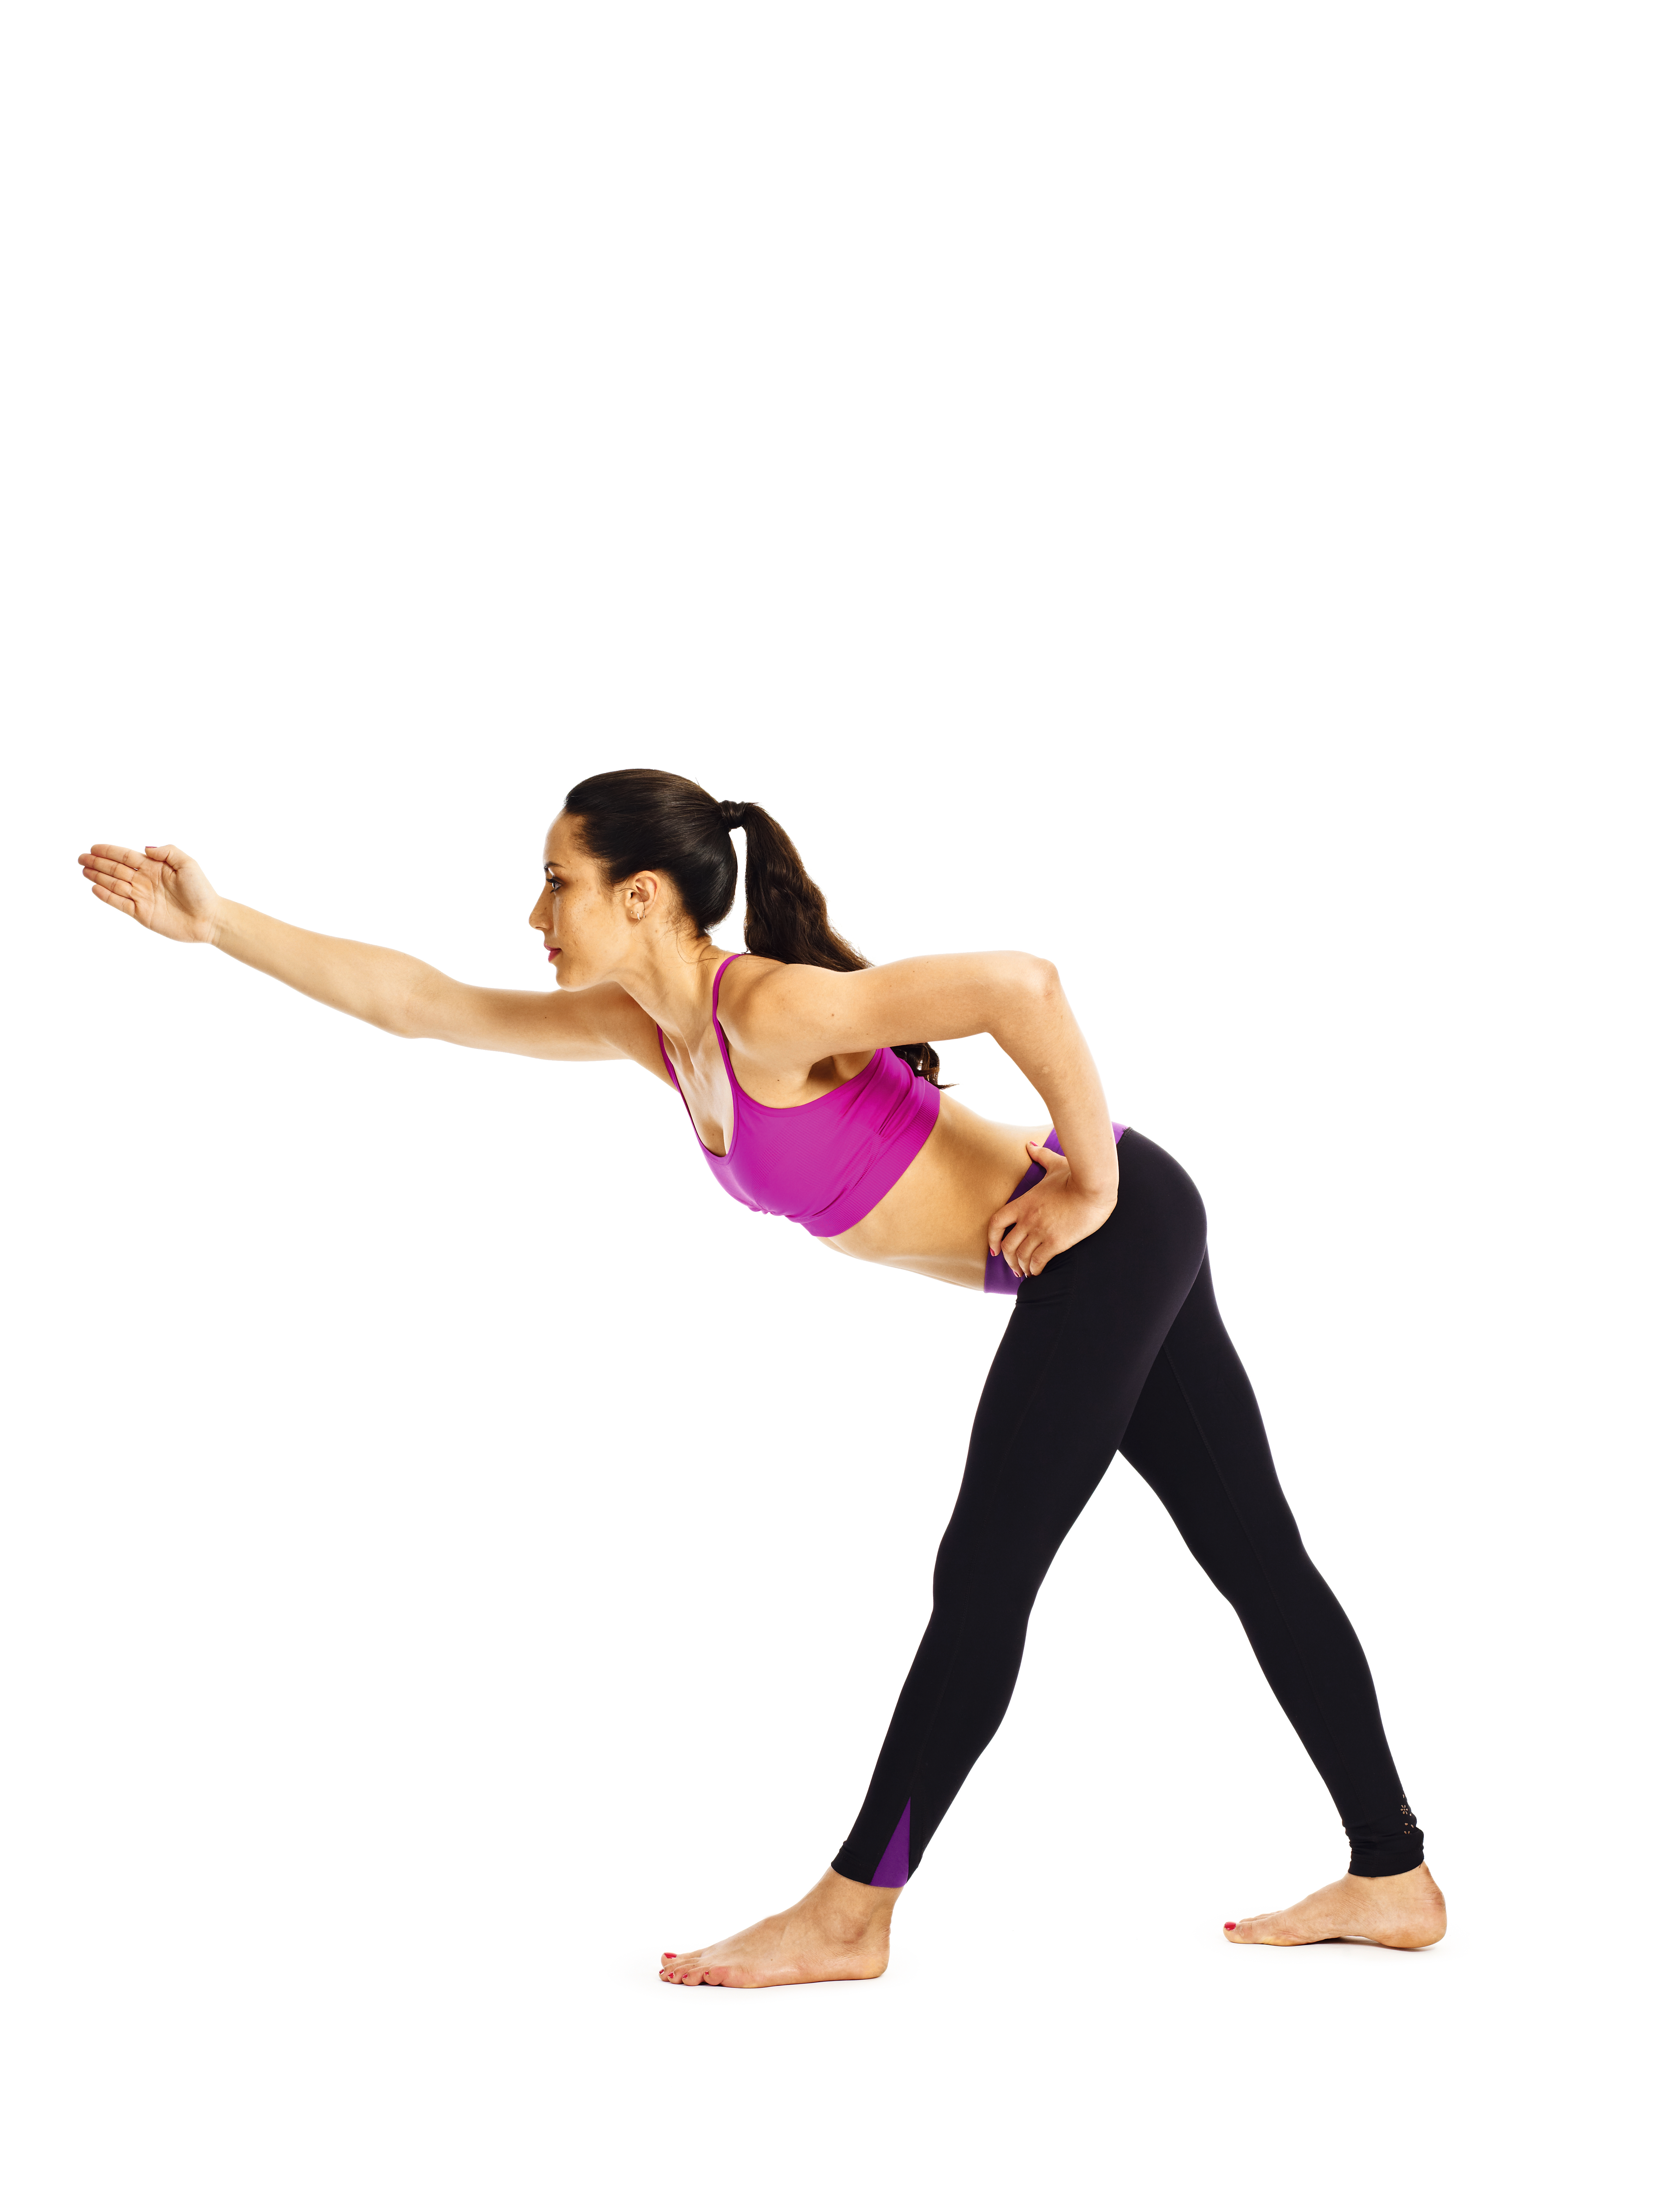 Try These 7 Fun Navasana (Boat Pose) Variations | YouAligned.com